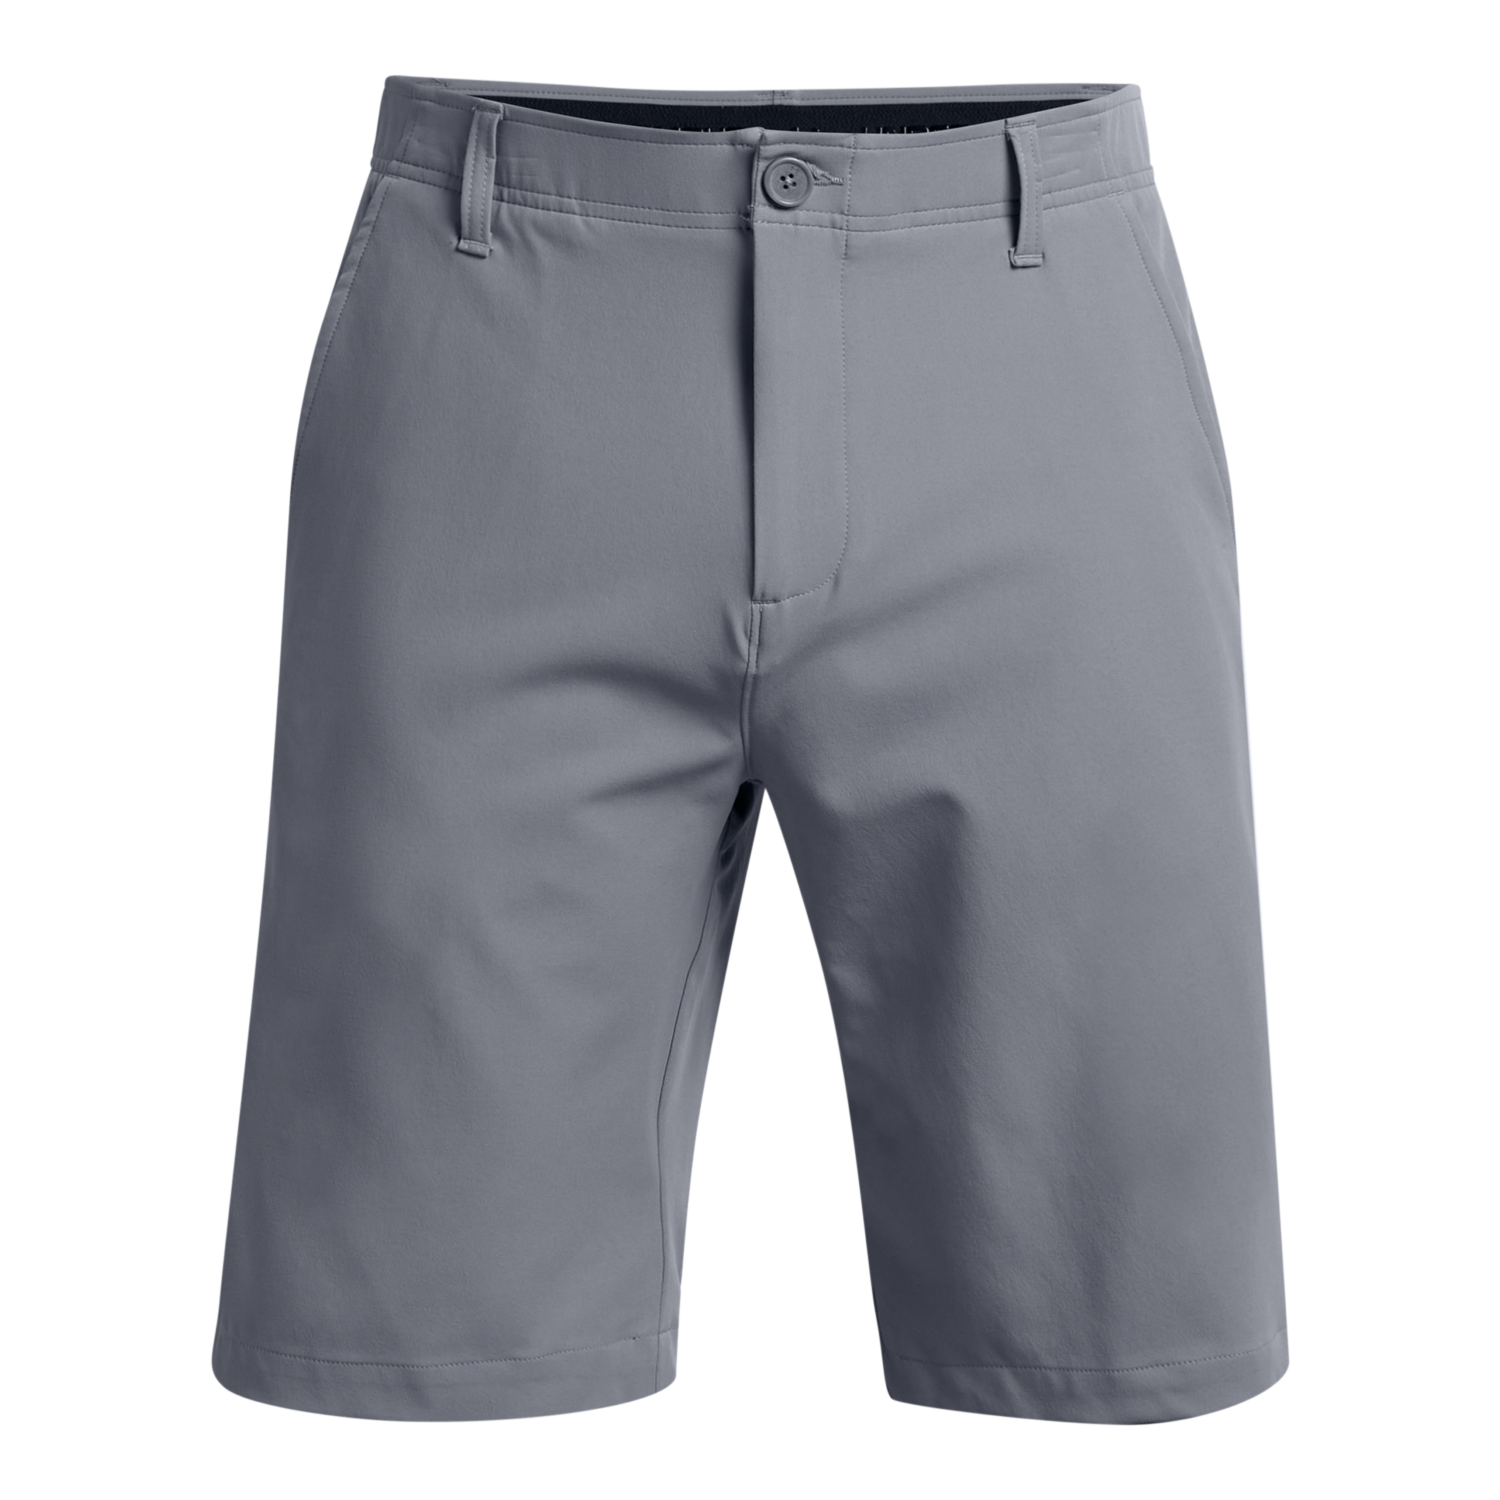 Under Armour Drive Tapered Shorts Steel